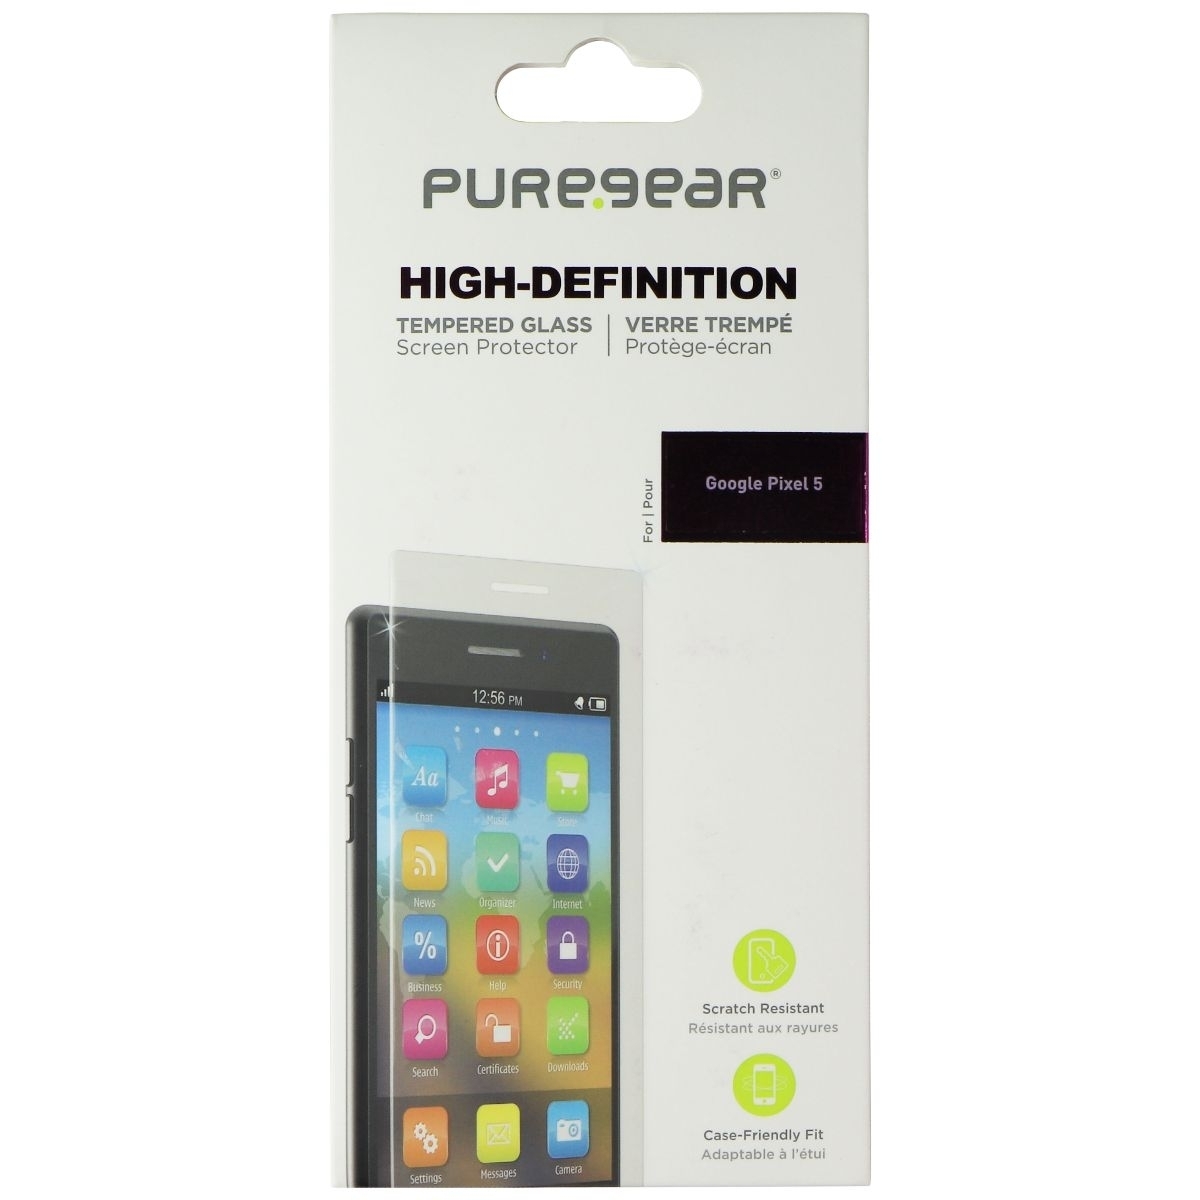 PureGear High-Definition Tempered Glass For Google Pixel 5 (2020) - Clear (Refurbished)